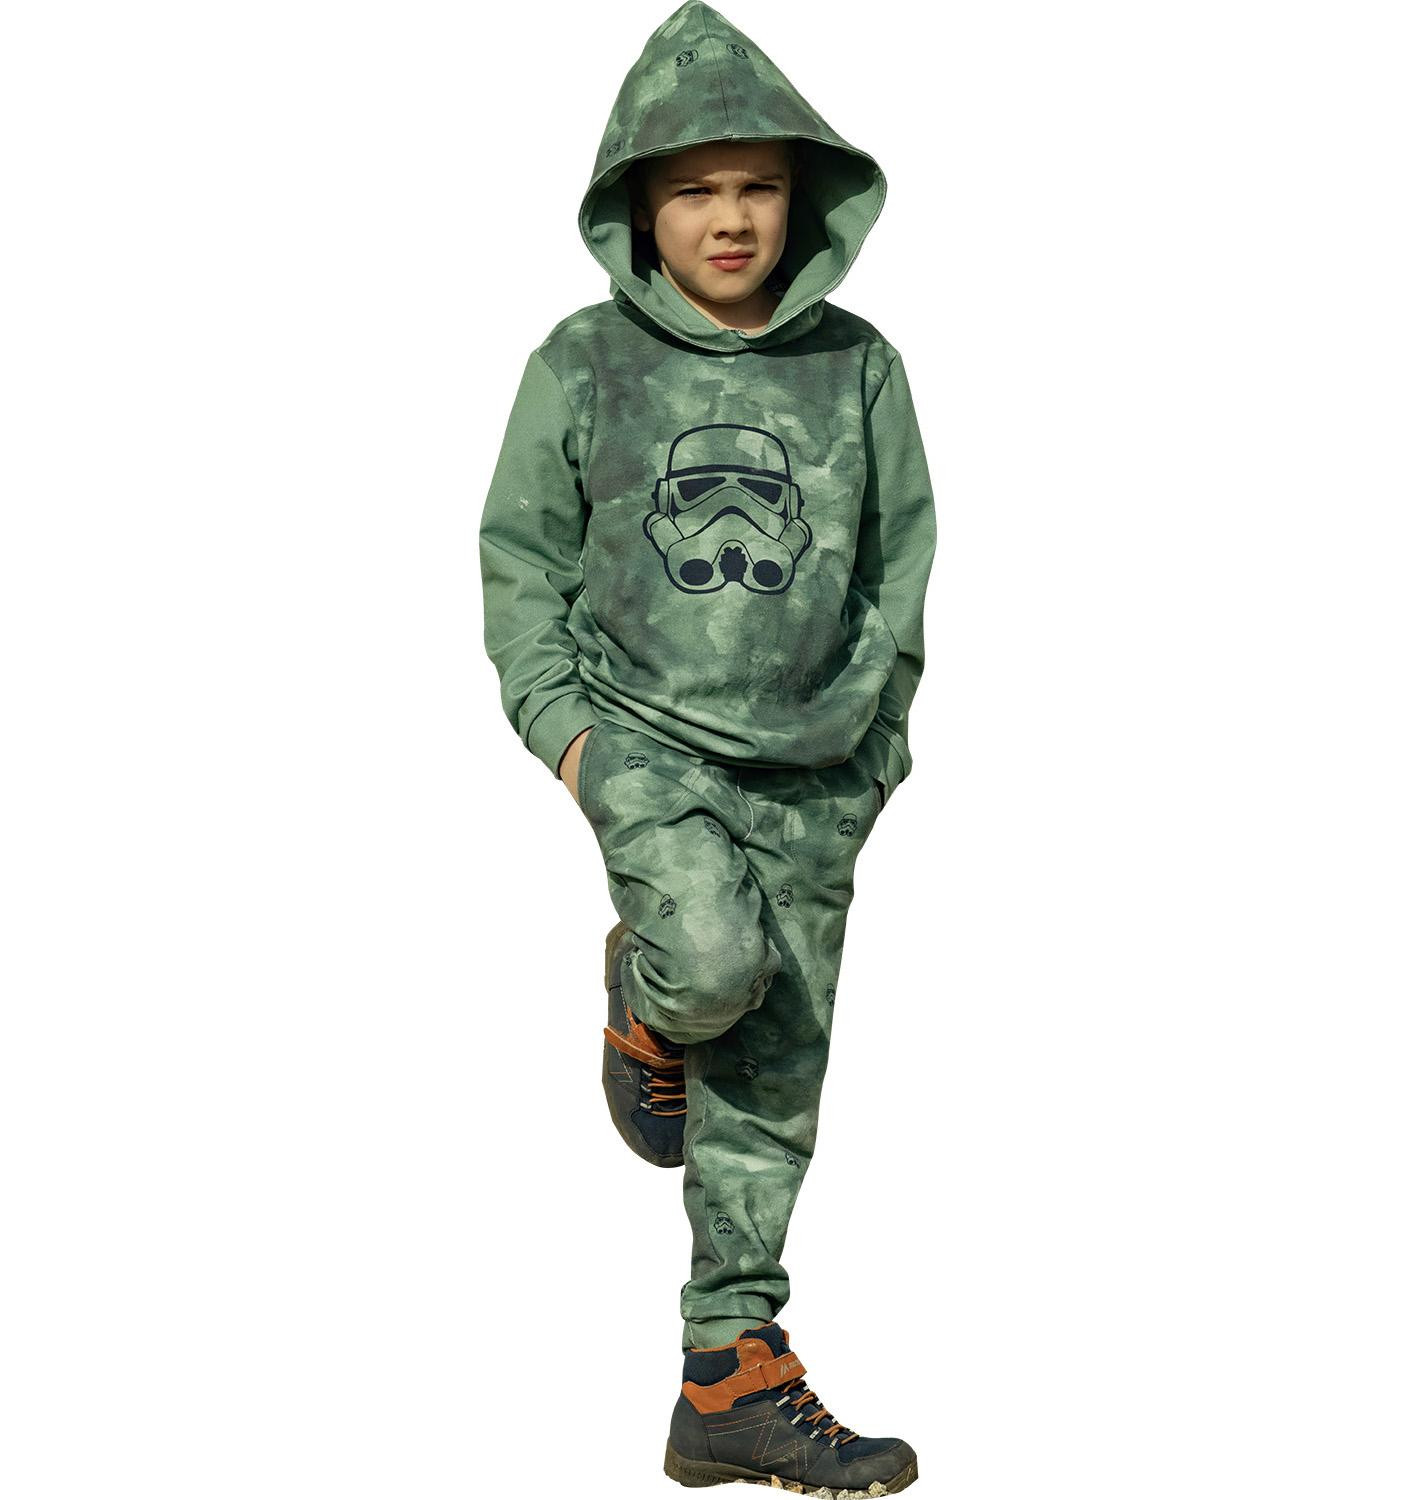 Children's tracksuit (OSLO) - CHEETAH / leaves / STRIPES - looped knit fabric 